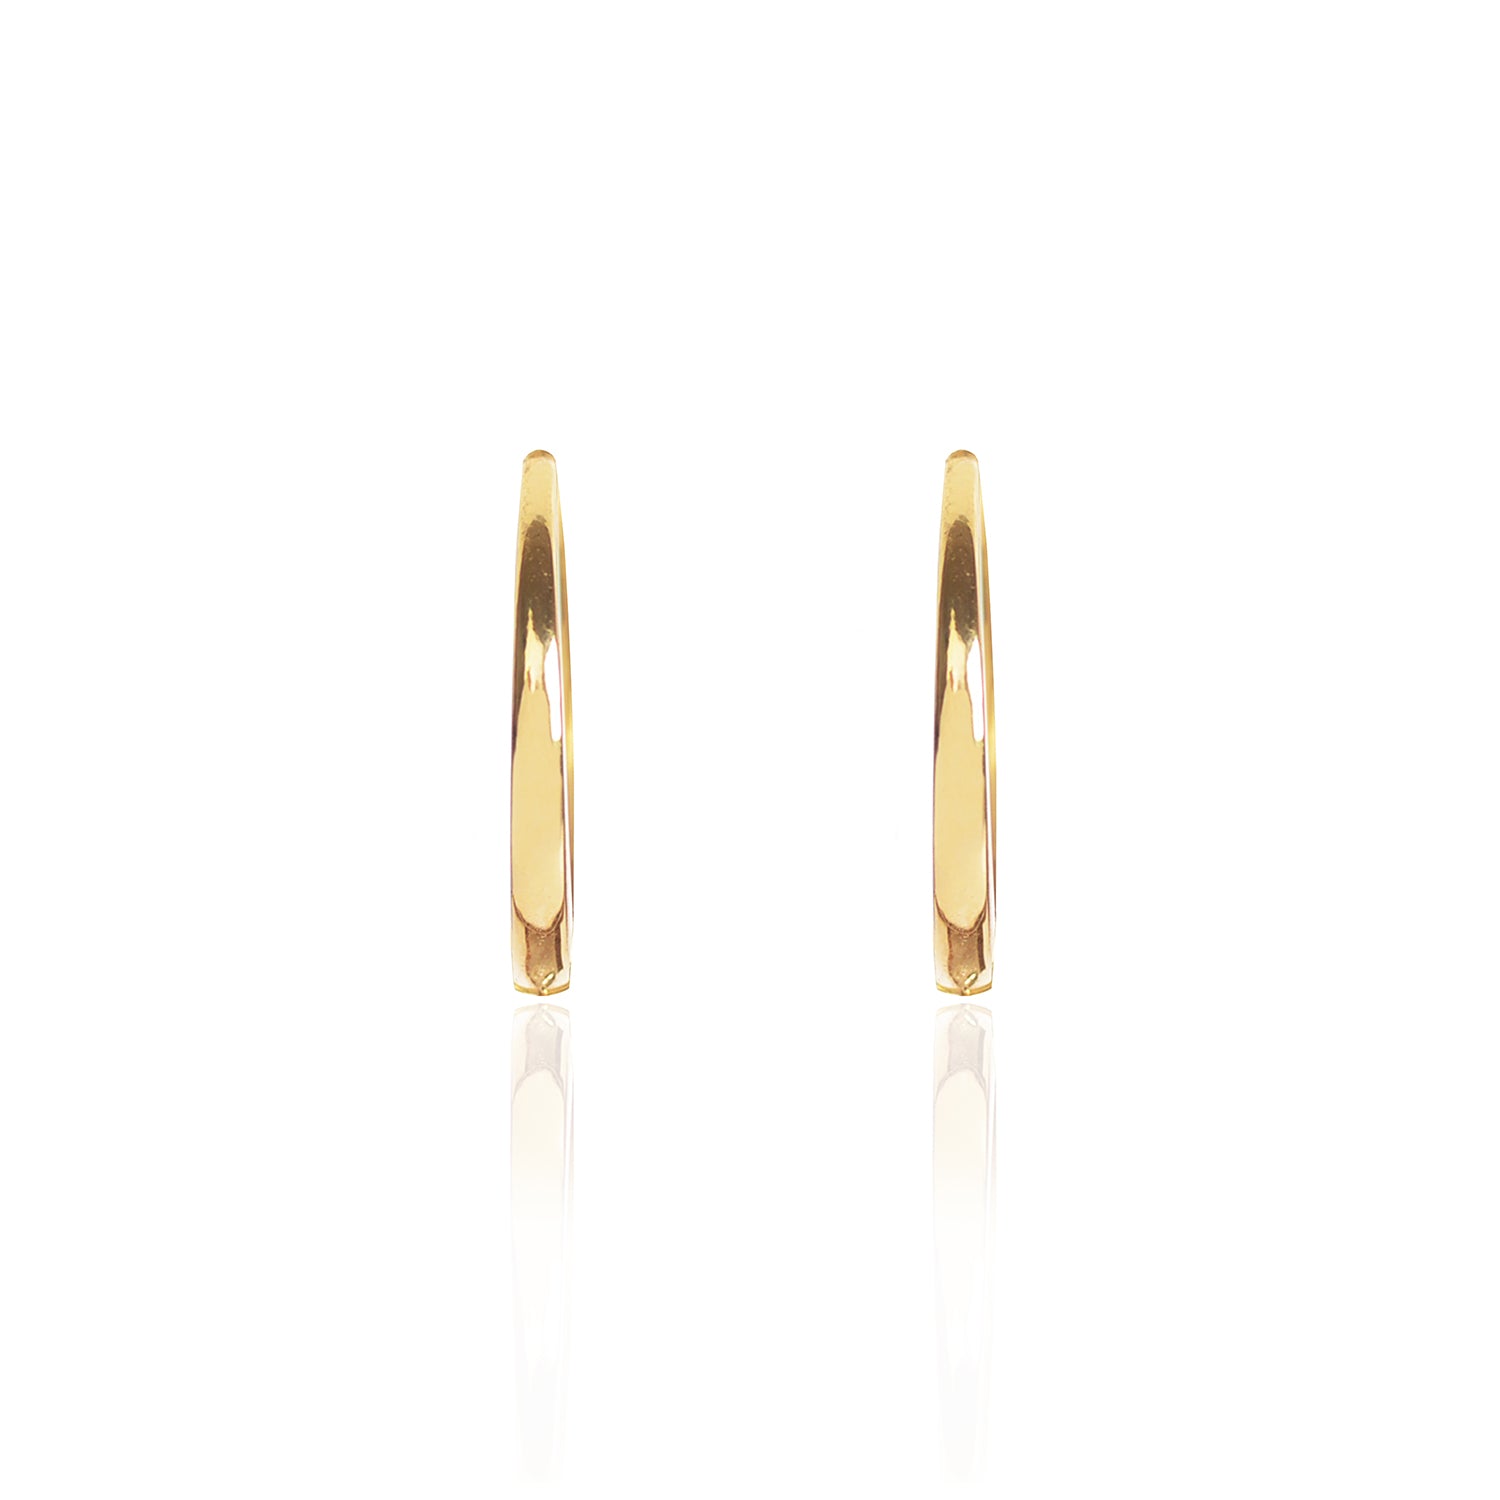 18ct yellow Gold Closed Hoops by McFarlane Fine Jewellery